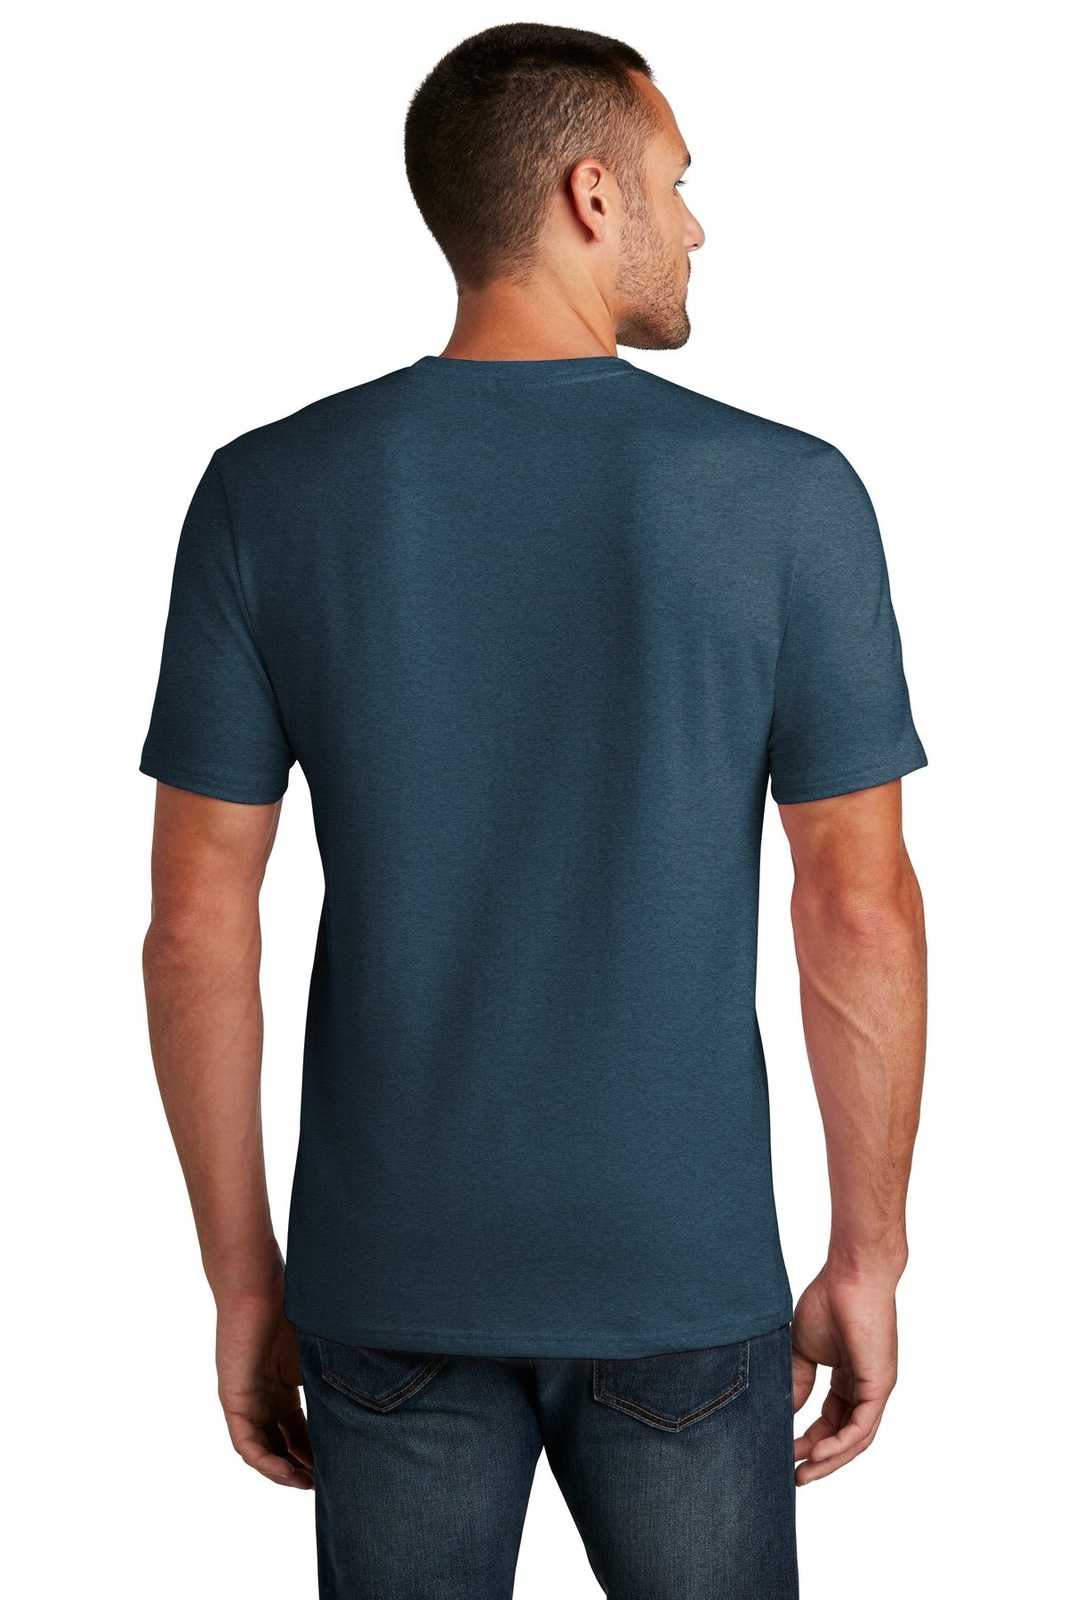 District DT7500 Flex Tee - Heathered Neptune Blue - HIT a Double - 2